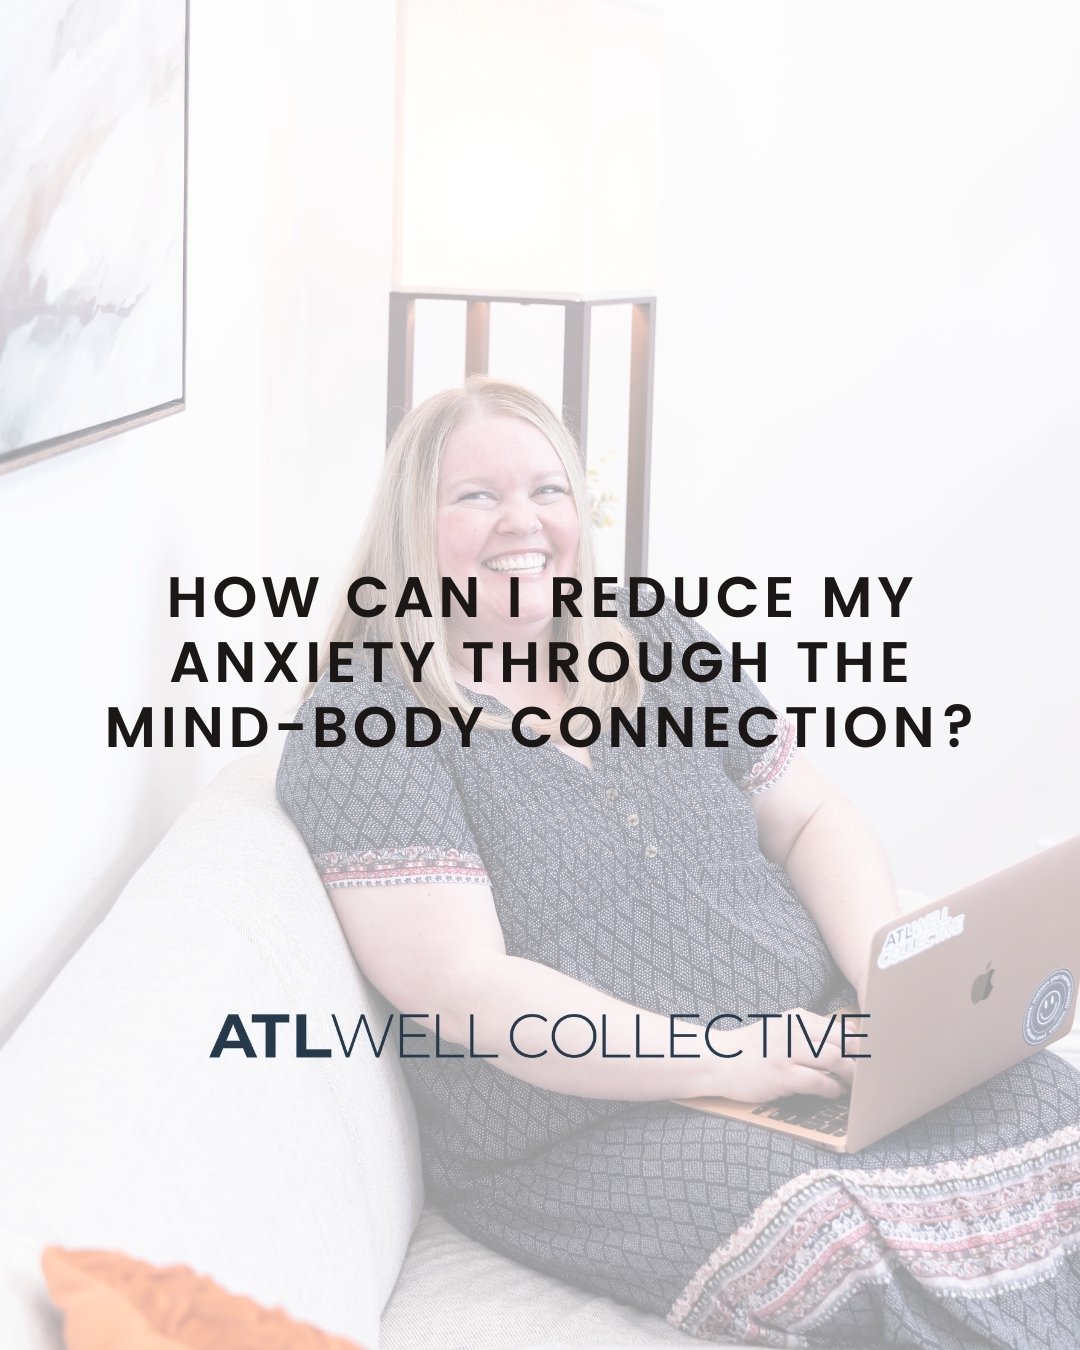 ON THE BLOG - Reducing Anxiety Through the Mind-Body Connection by Julia Webb, MA, LAPC

Visit our blog - - Julia shares a 5 step process to reduce your anxiety from the lens of the mind-body connection.

Go to atlwell.com/blog &mdash; or use the lin